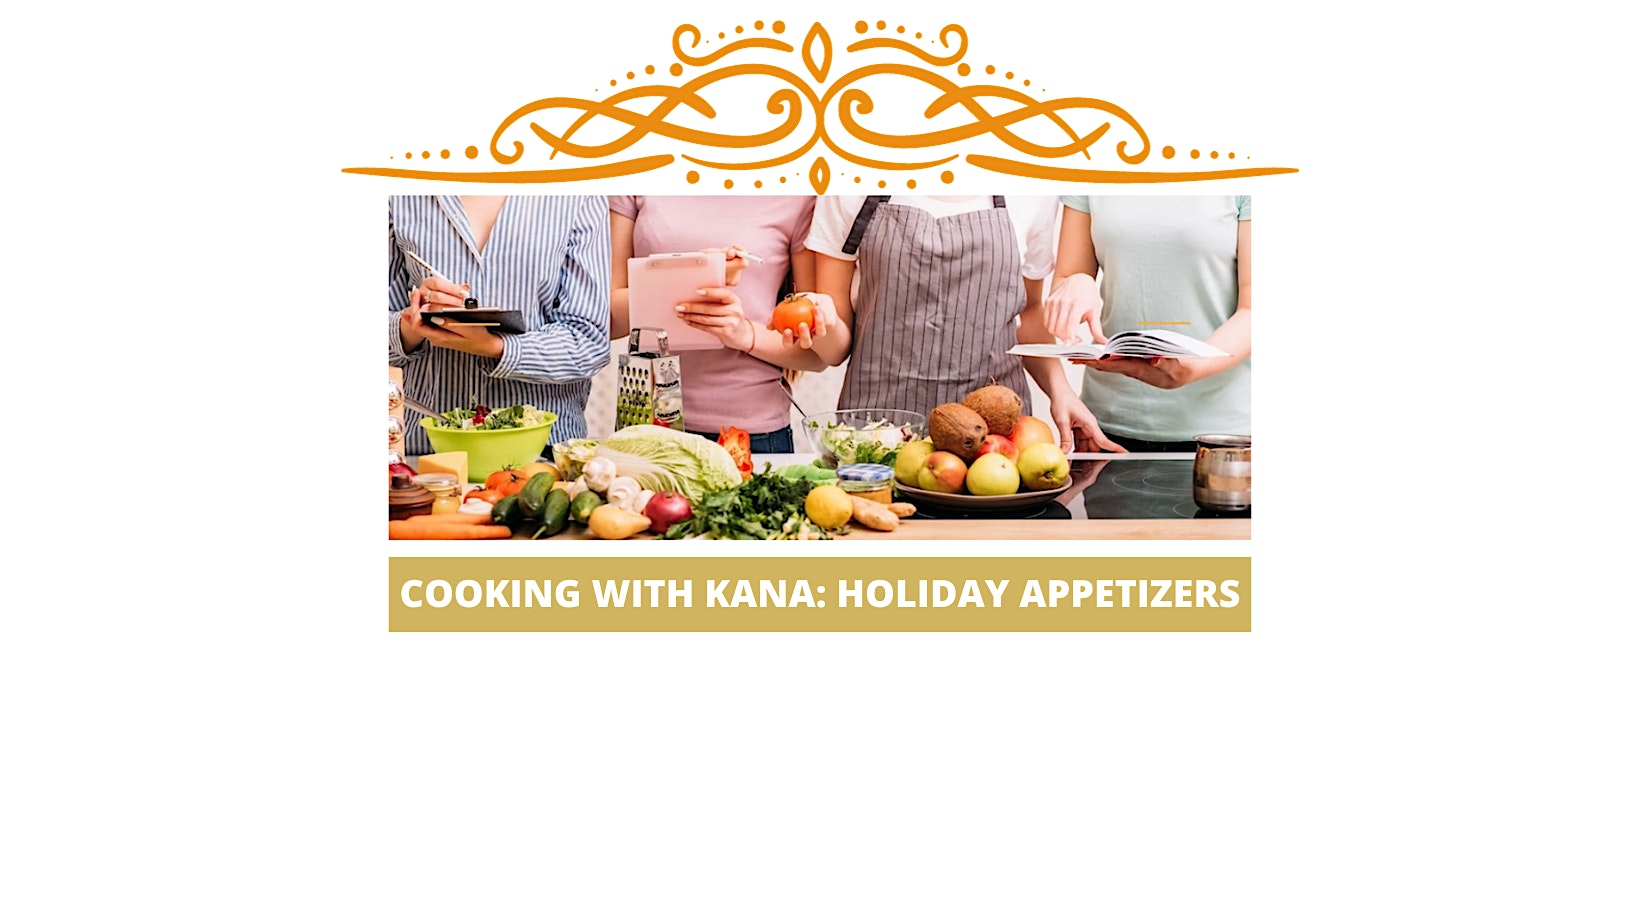 Cooking with Kana: Holiday Appetizers